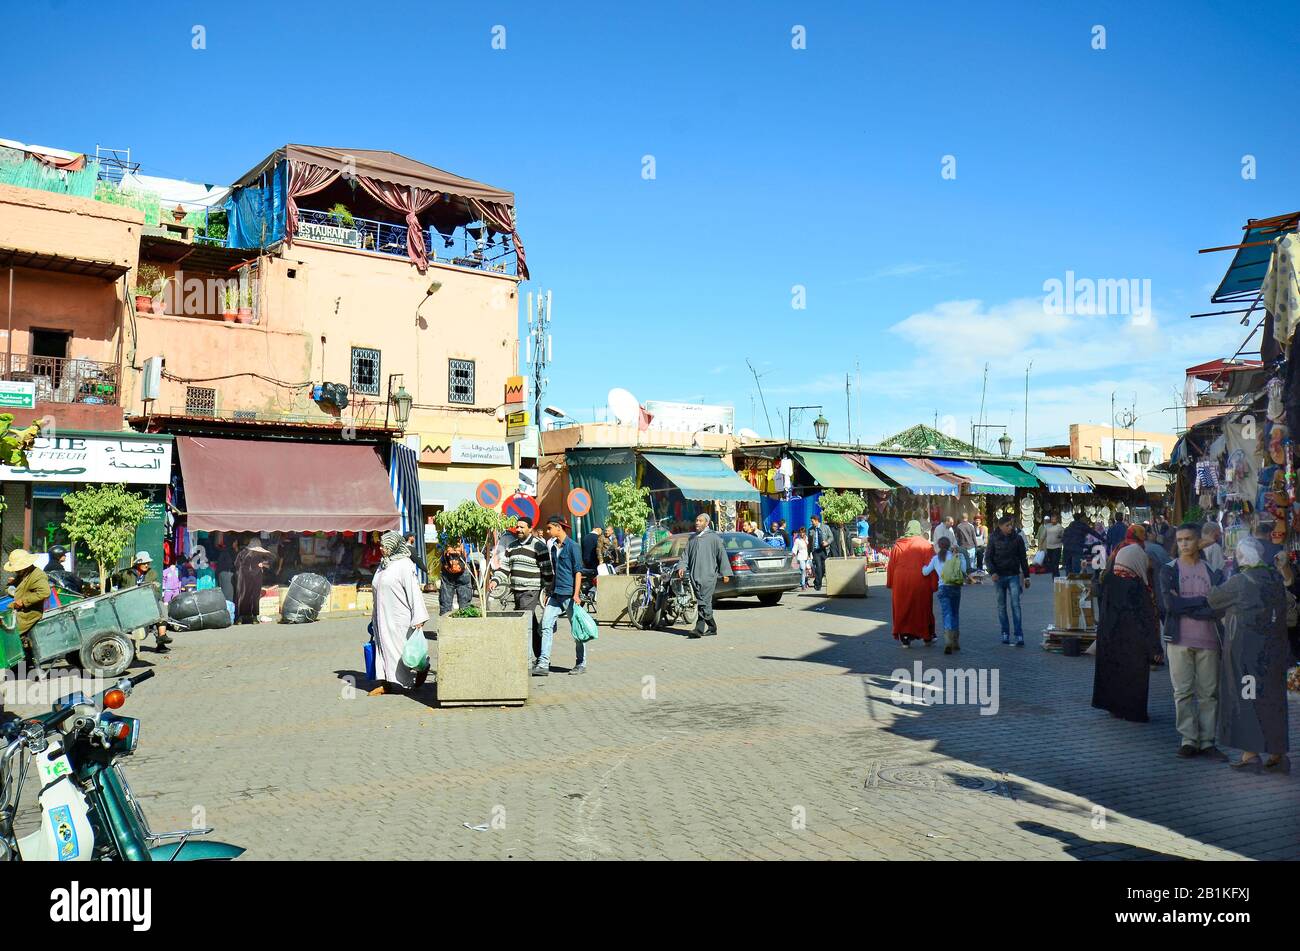 Marrakesh, Morocco - November 22nd 2014: Unidentified people and shops in the souk in old precinct named Medina Stock Photo